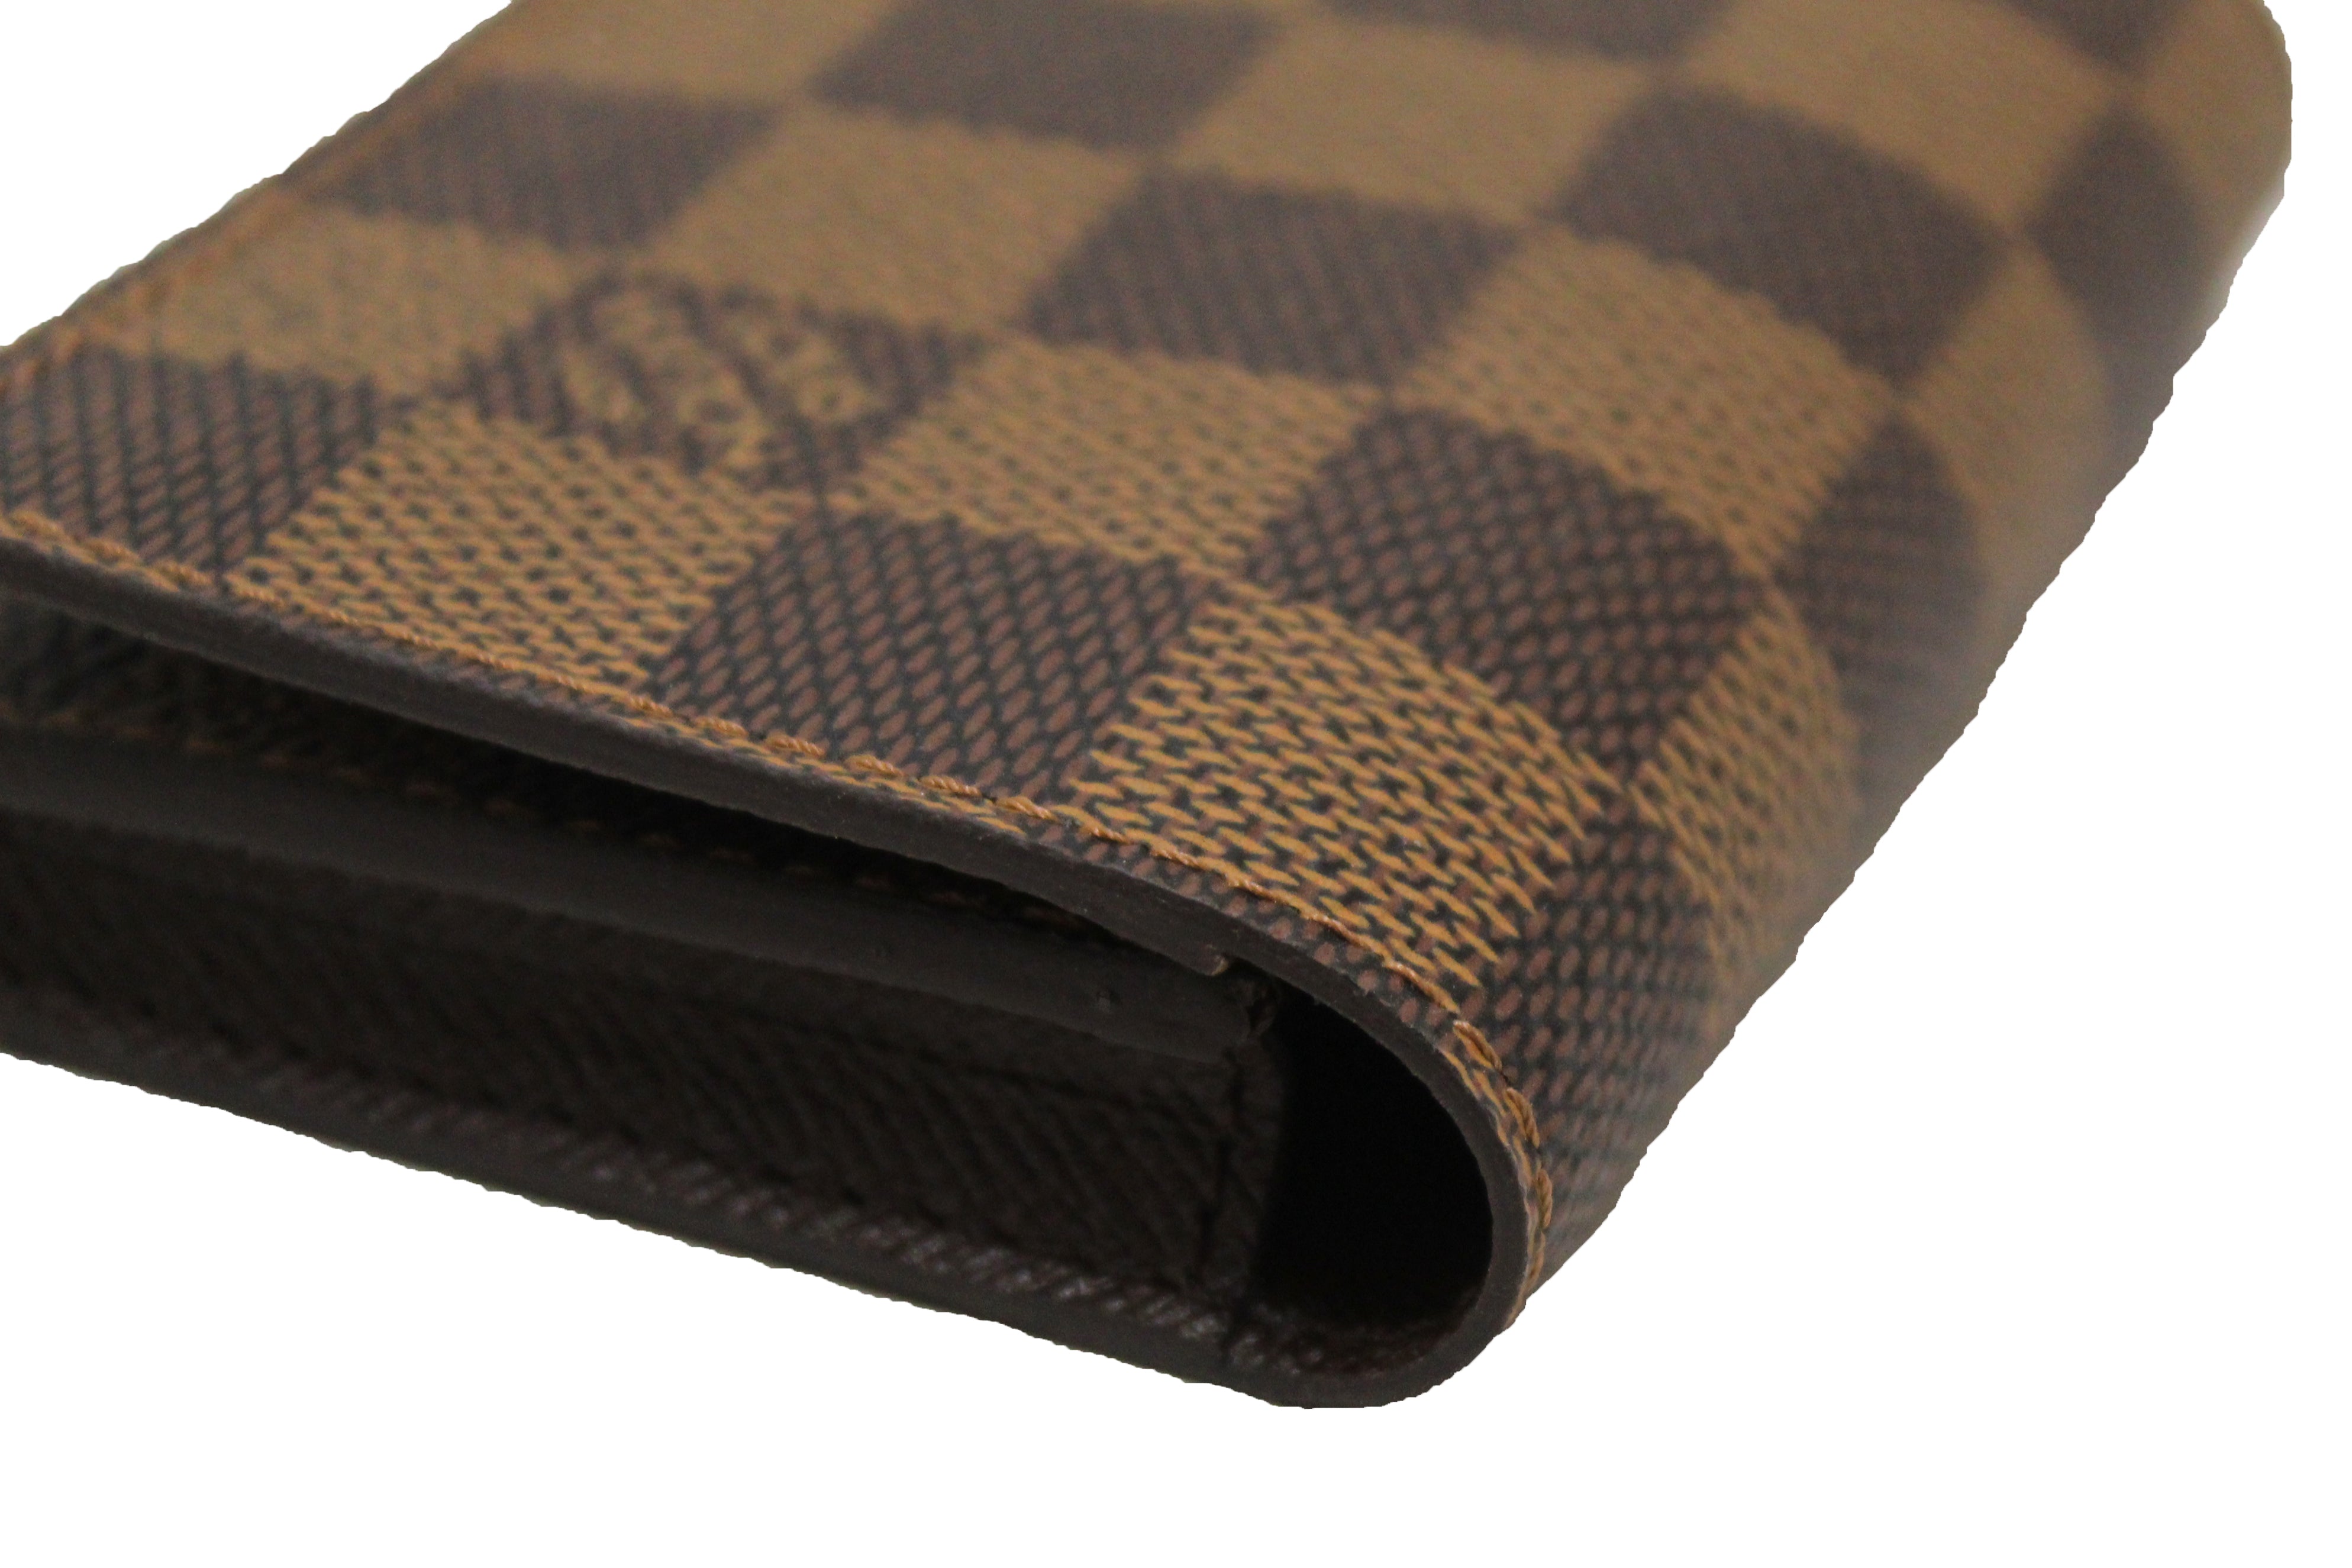 Authentic Louis Vuitton Damier Ebene Canvas Card Holder – Italy Station